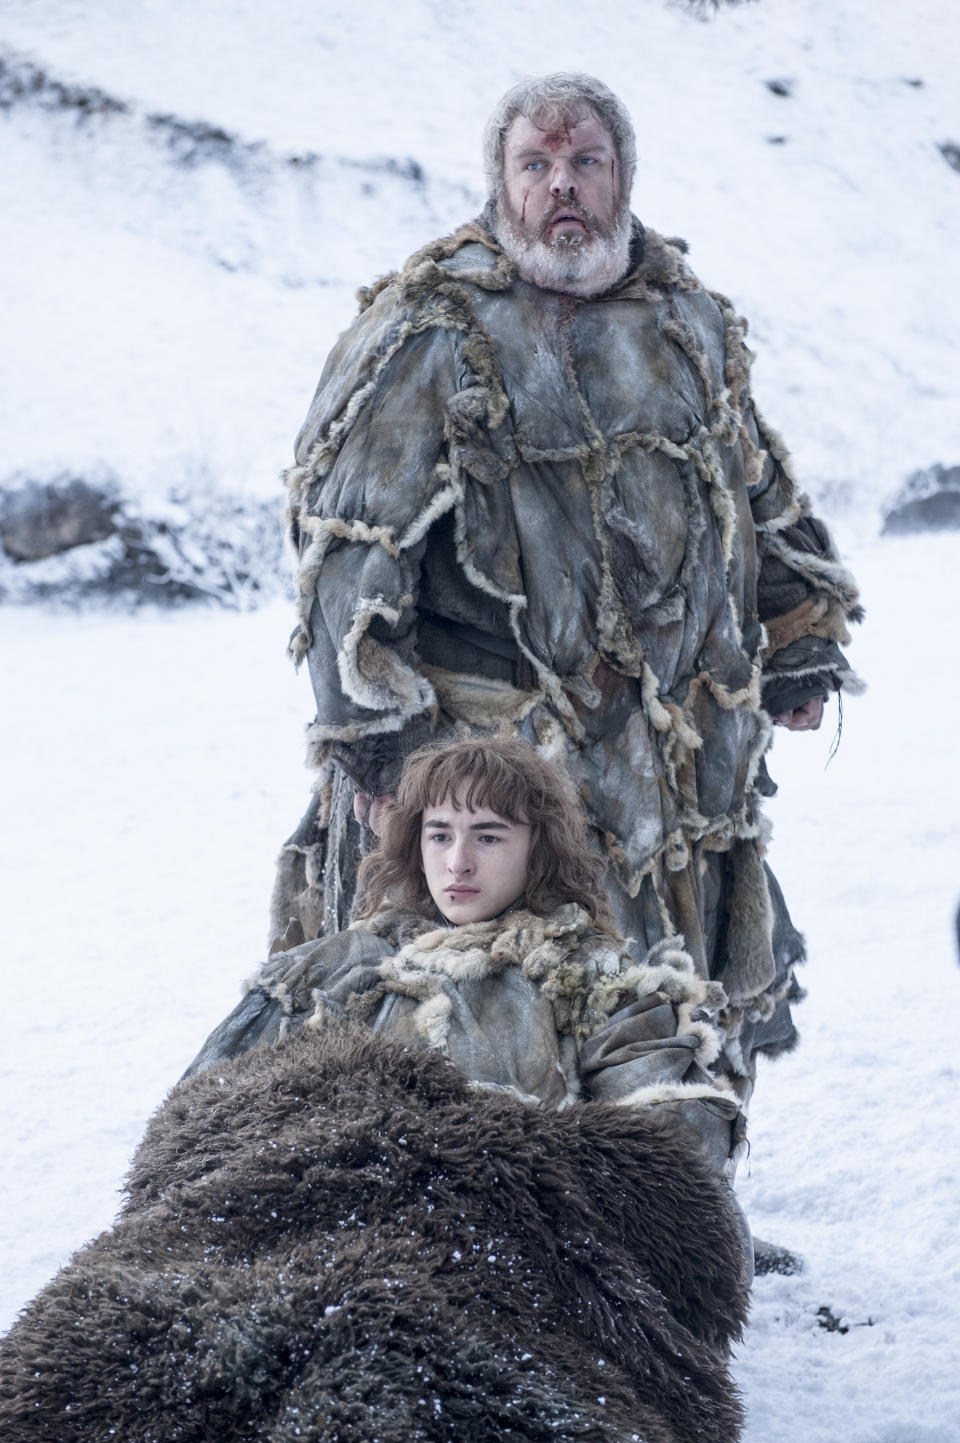 Hodor (Kristian Nairn) and Bran Stark (Isaac Hempstead Wright) in “Game of Thrones”. (PHOTO: HBO)